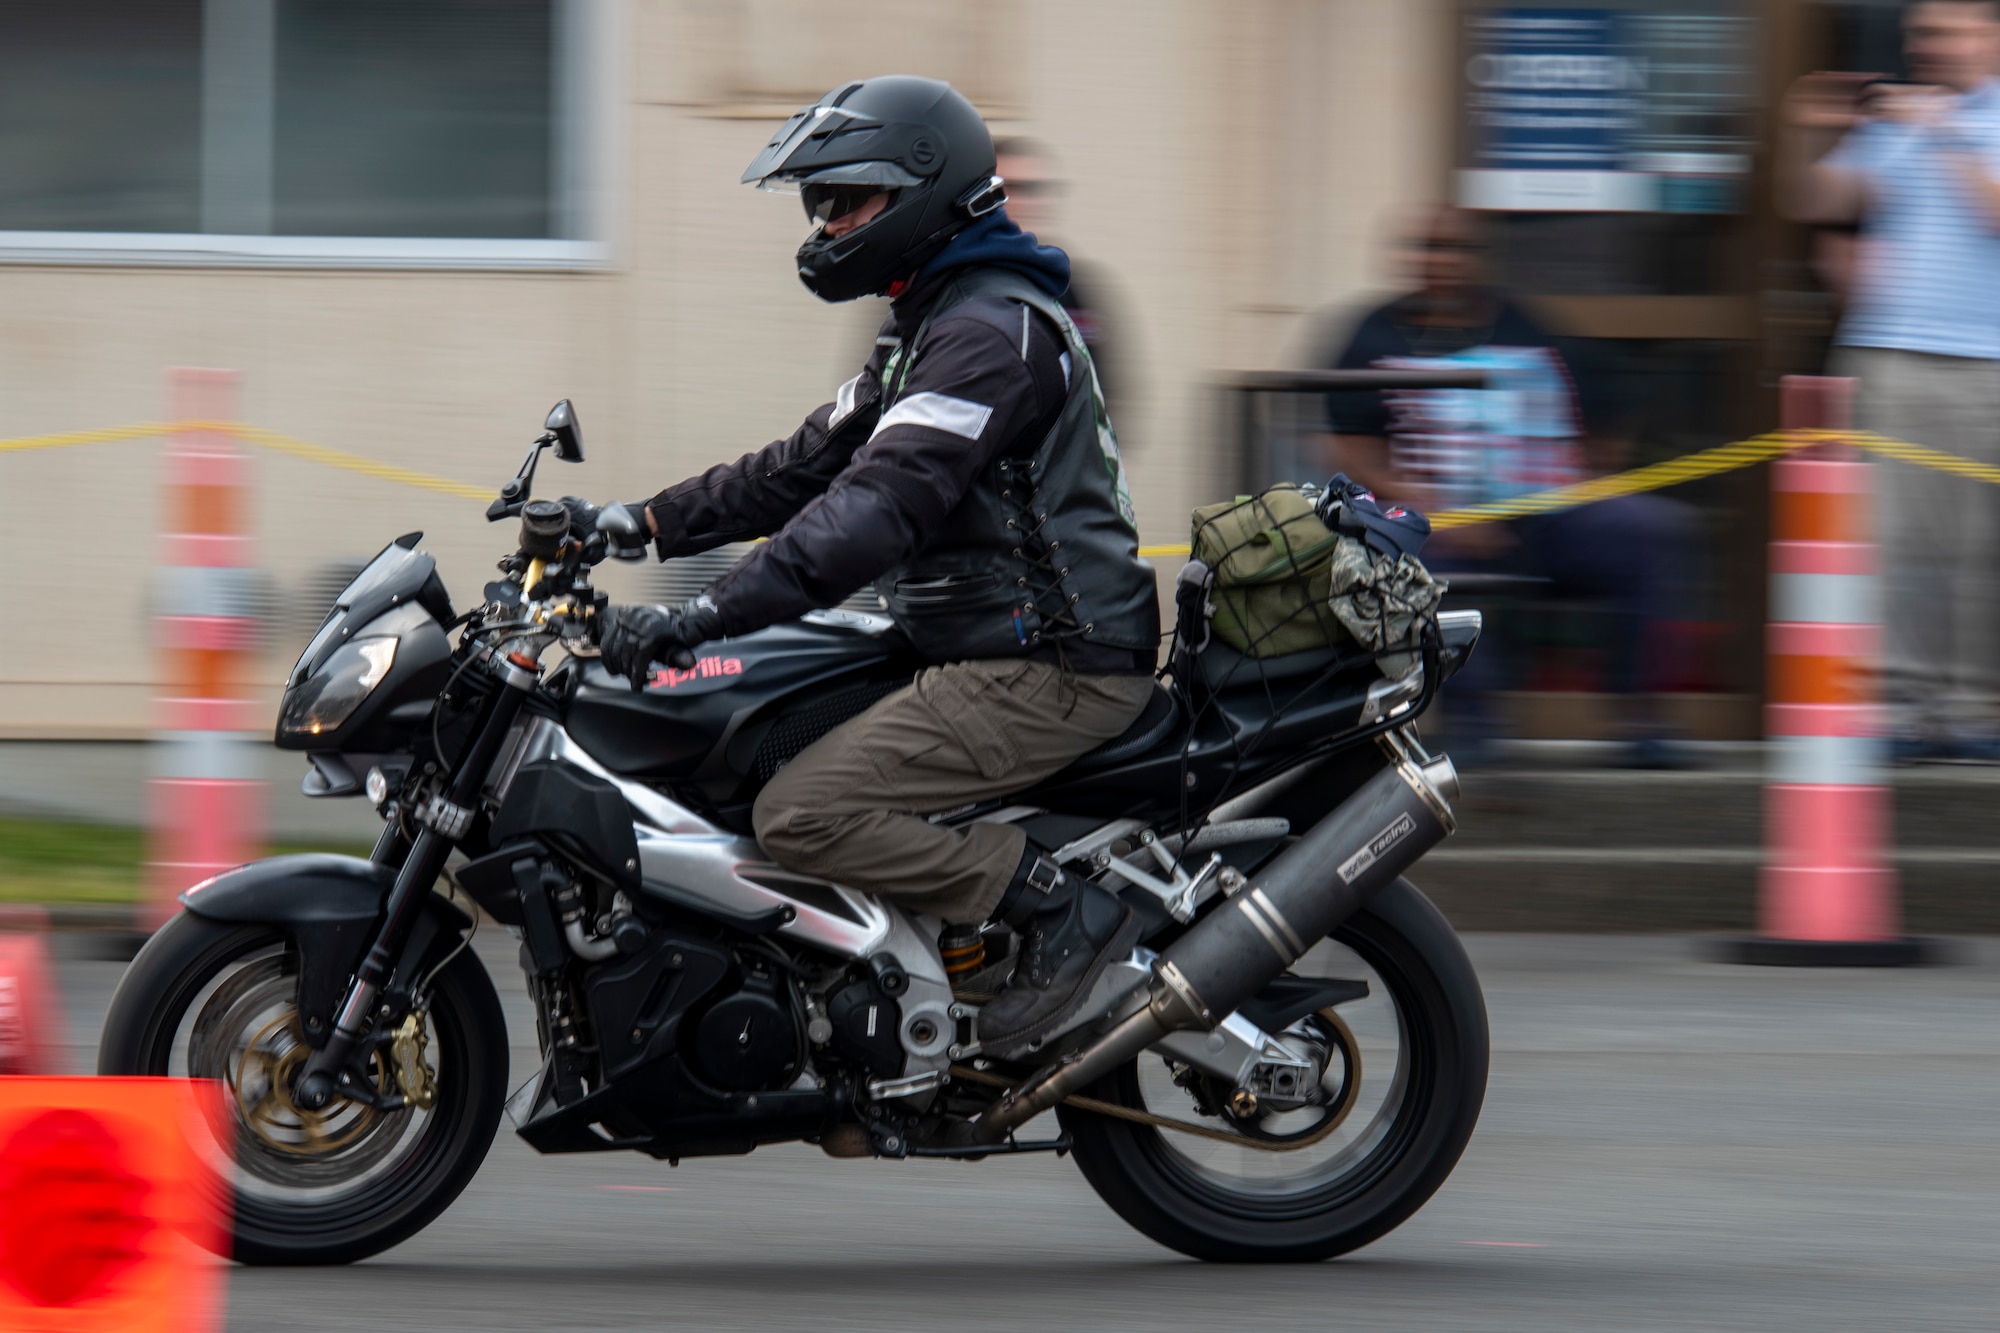 A closeup of a motorcycle rider as he zooms past